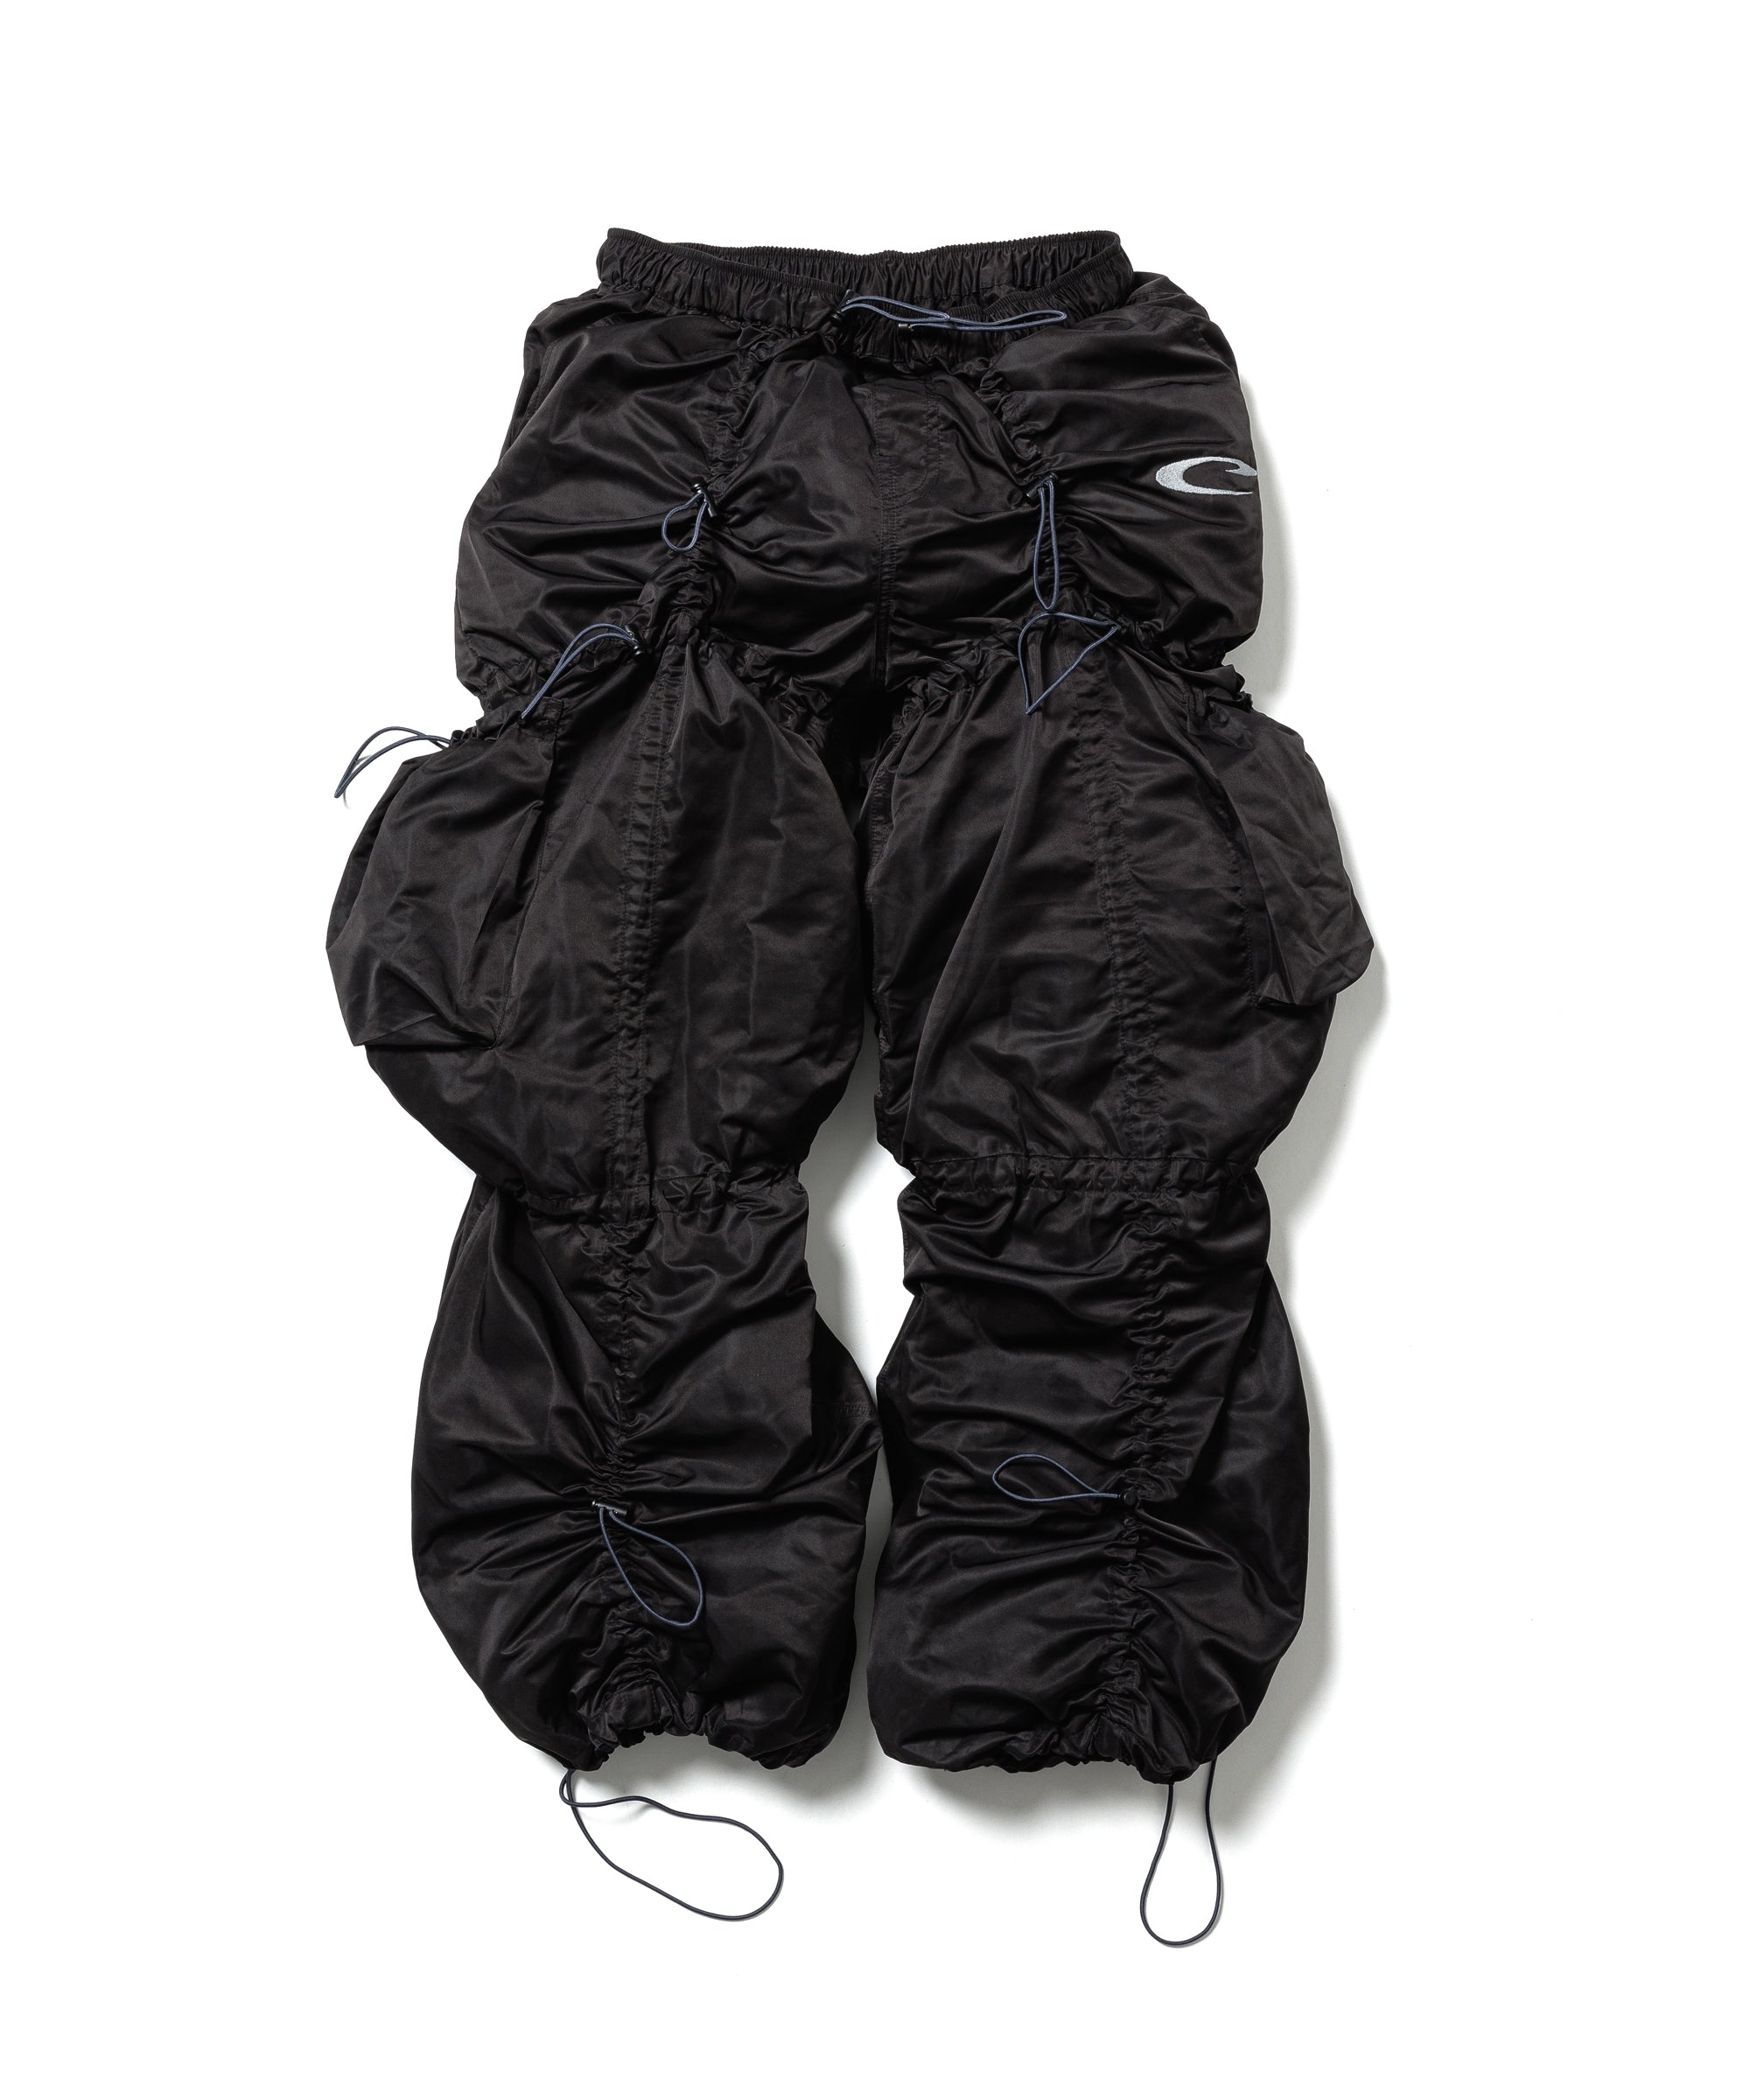 CPG ANOMALY CORD PANTS 24SS – F-LAGSTUF-F